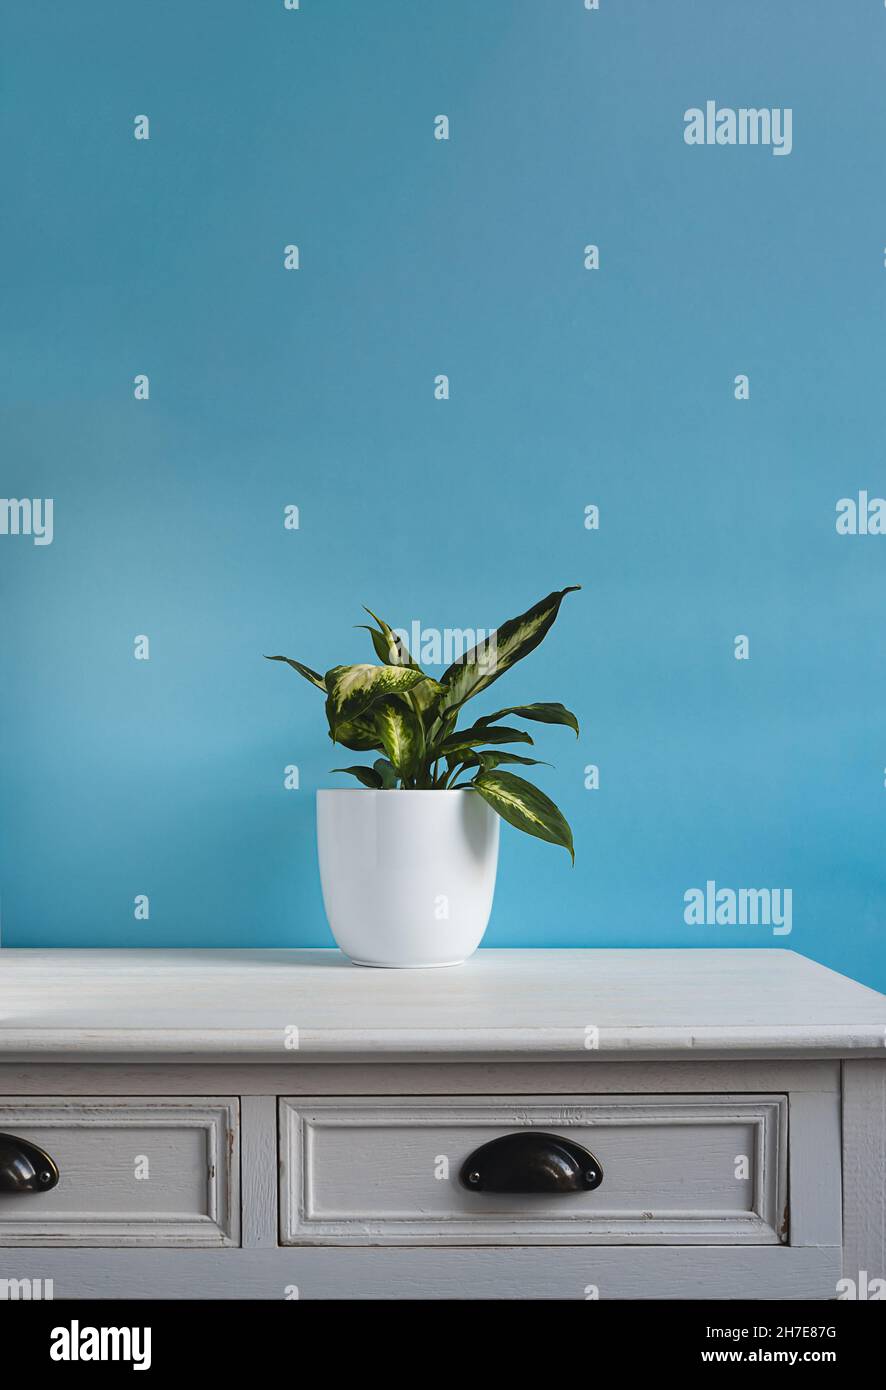 Dieffenbachia or Dumb cane plant in a white flower pot on a white old table in daylight room, minimalist and scandinavian style Stock Photo